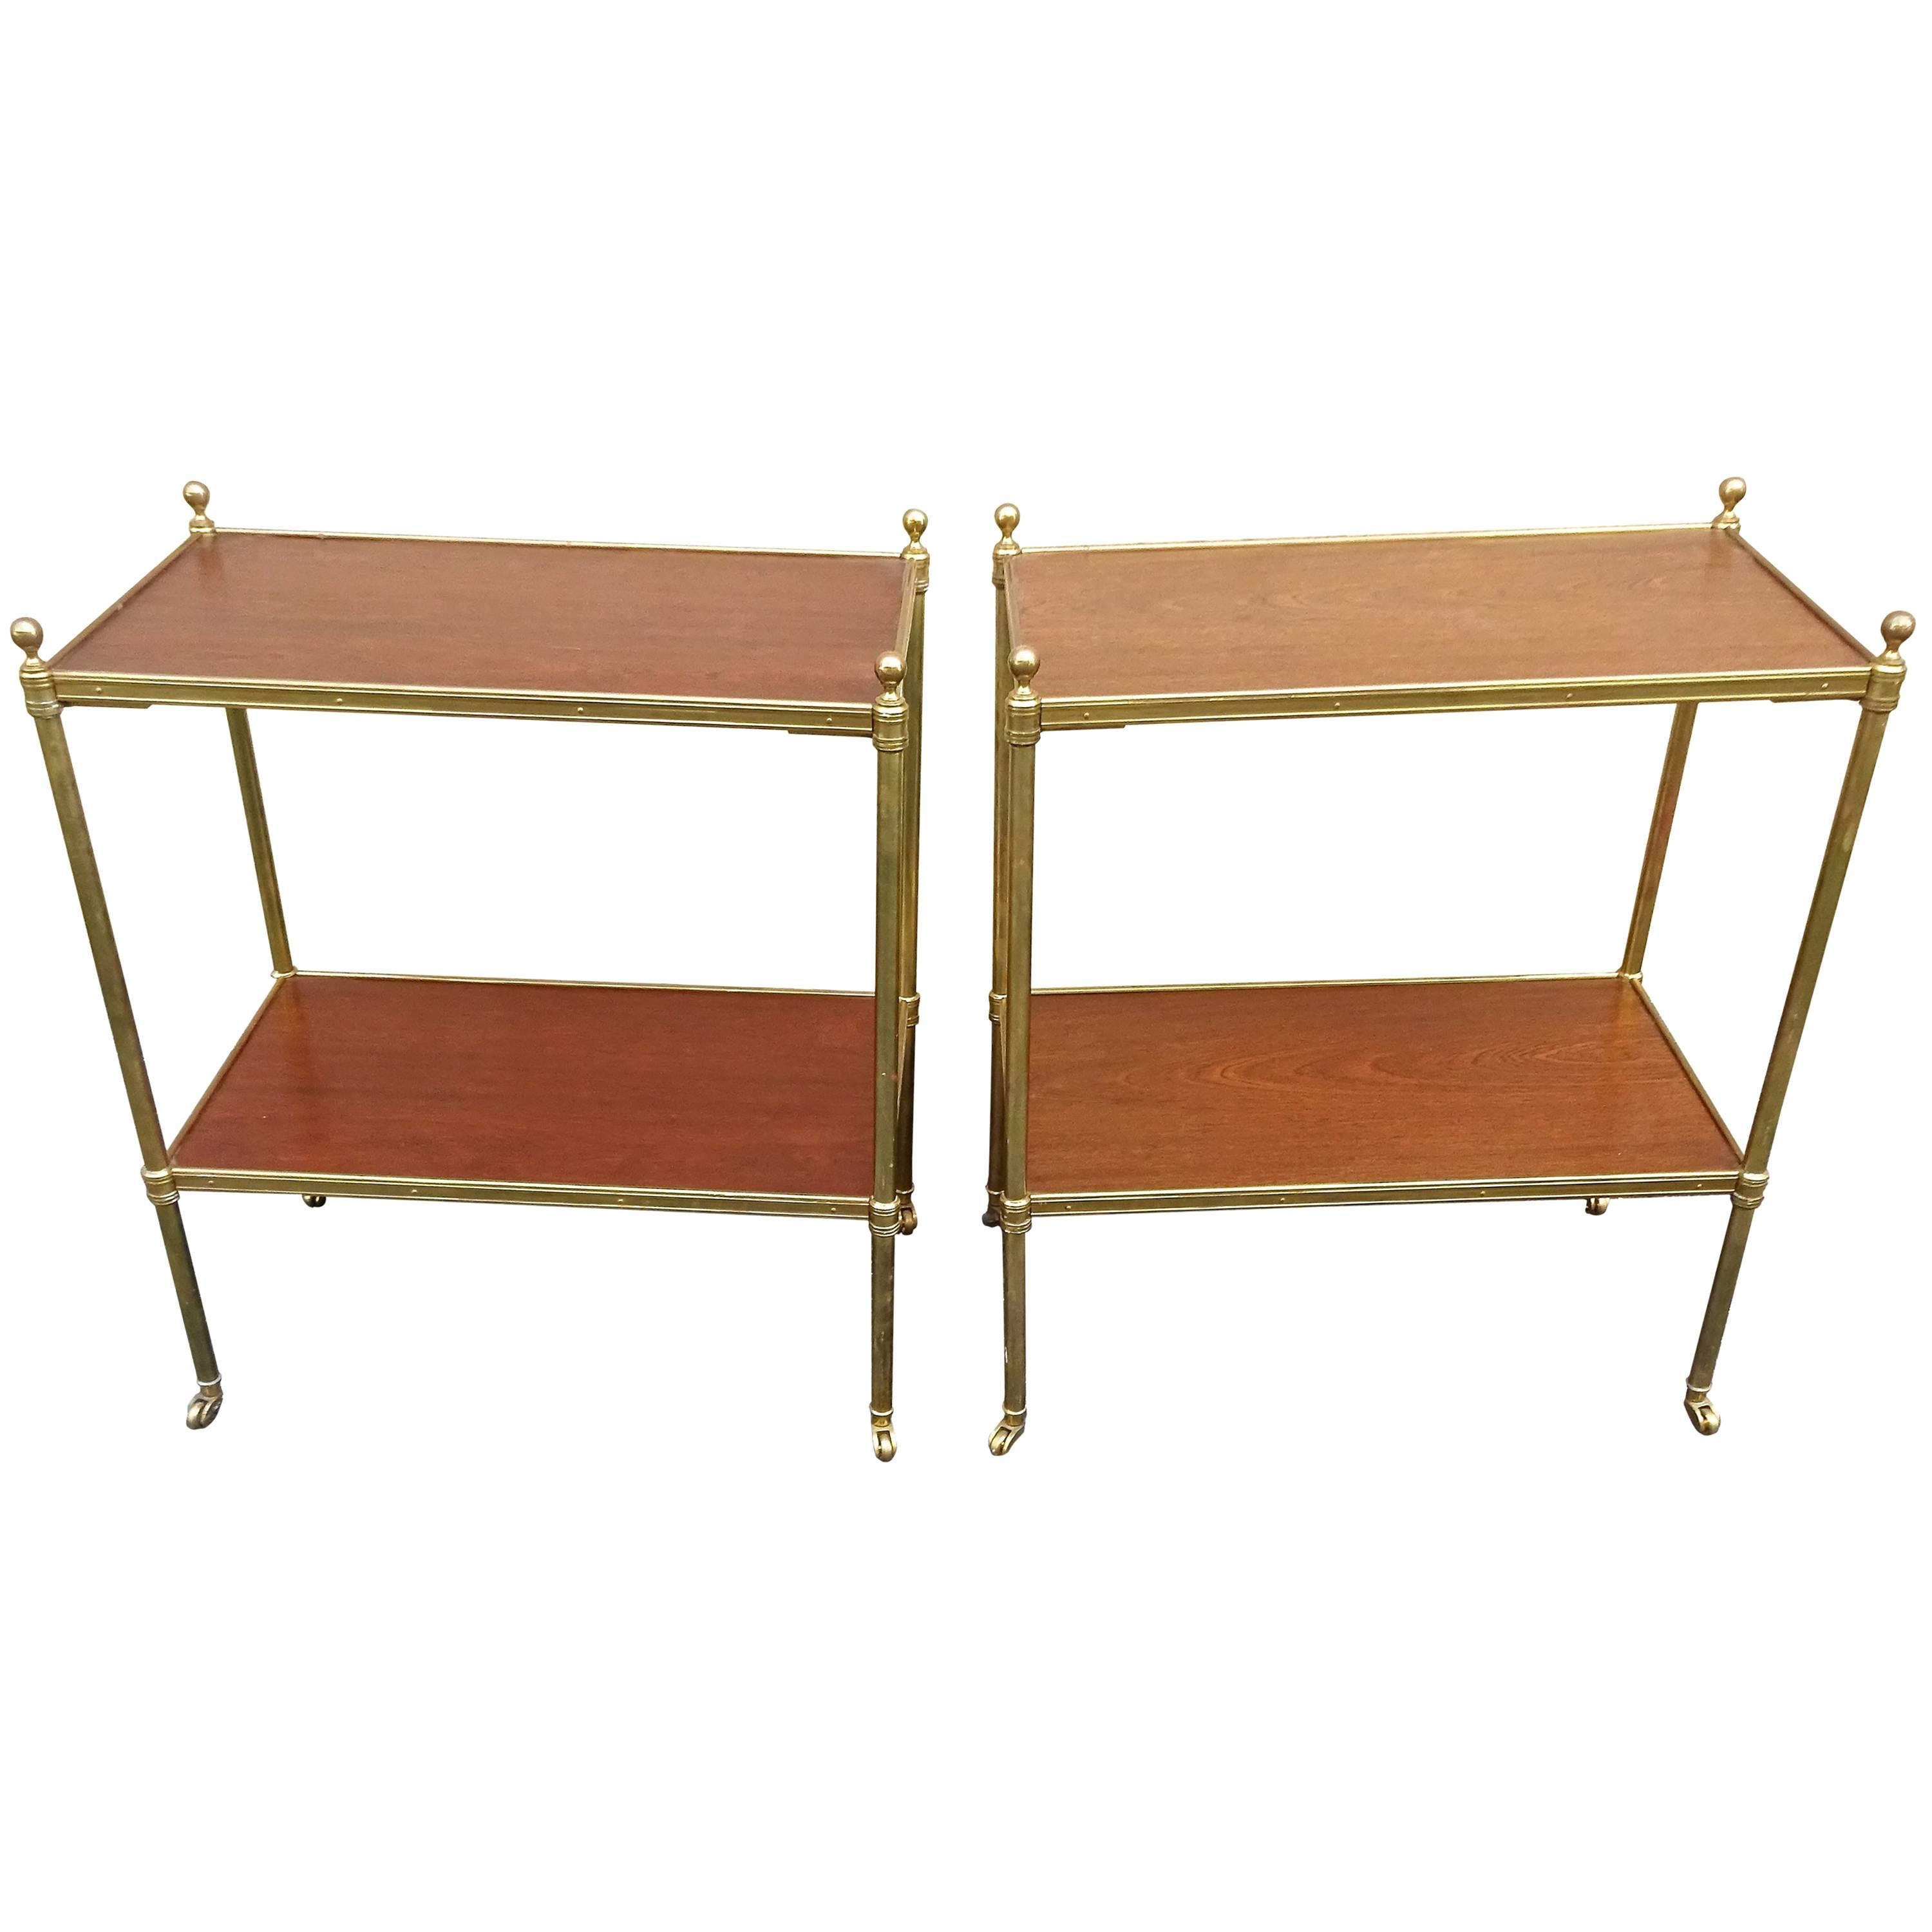 Chic Pair of 1960s, Italian Regency Style Mahogany and Brass Side Tables